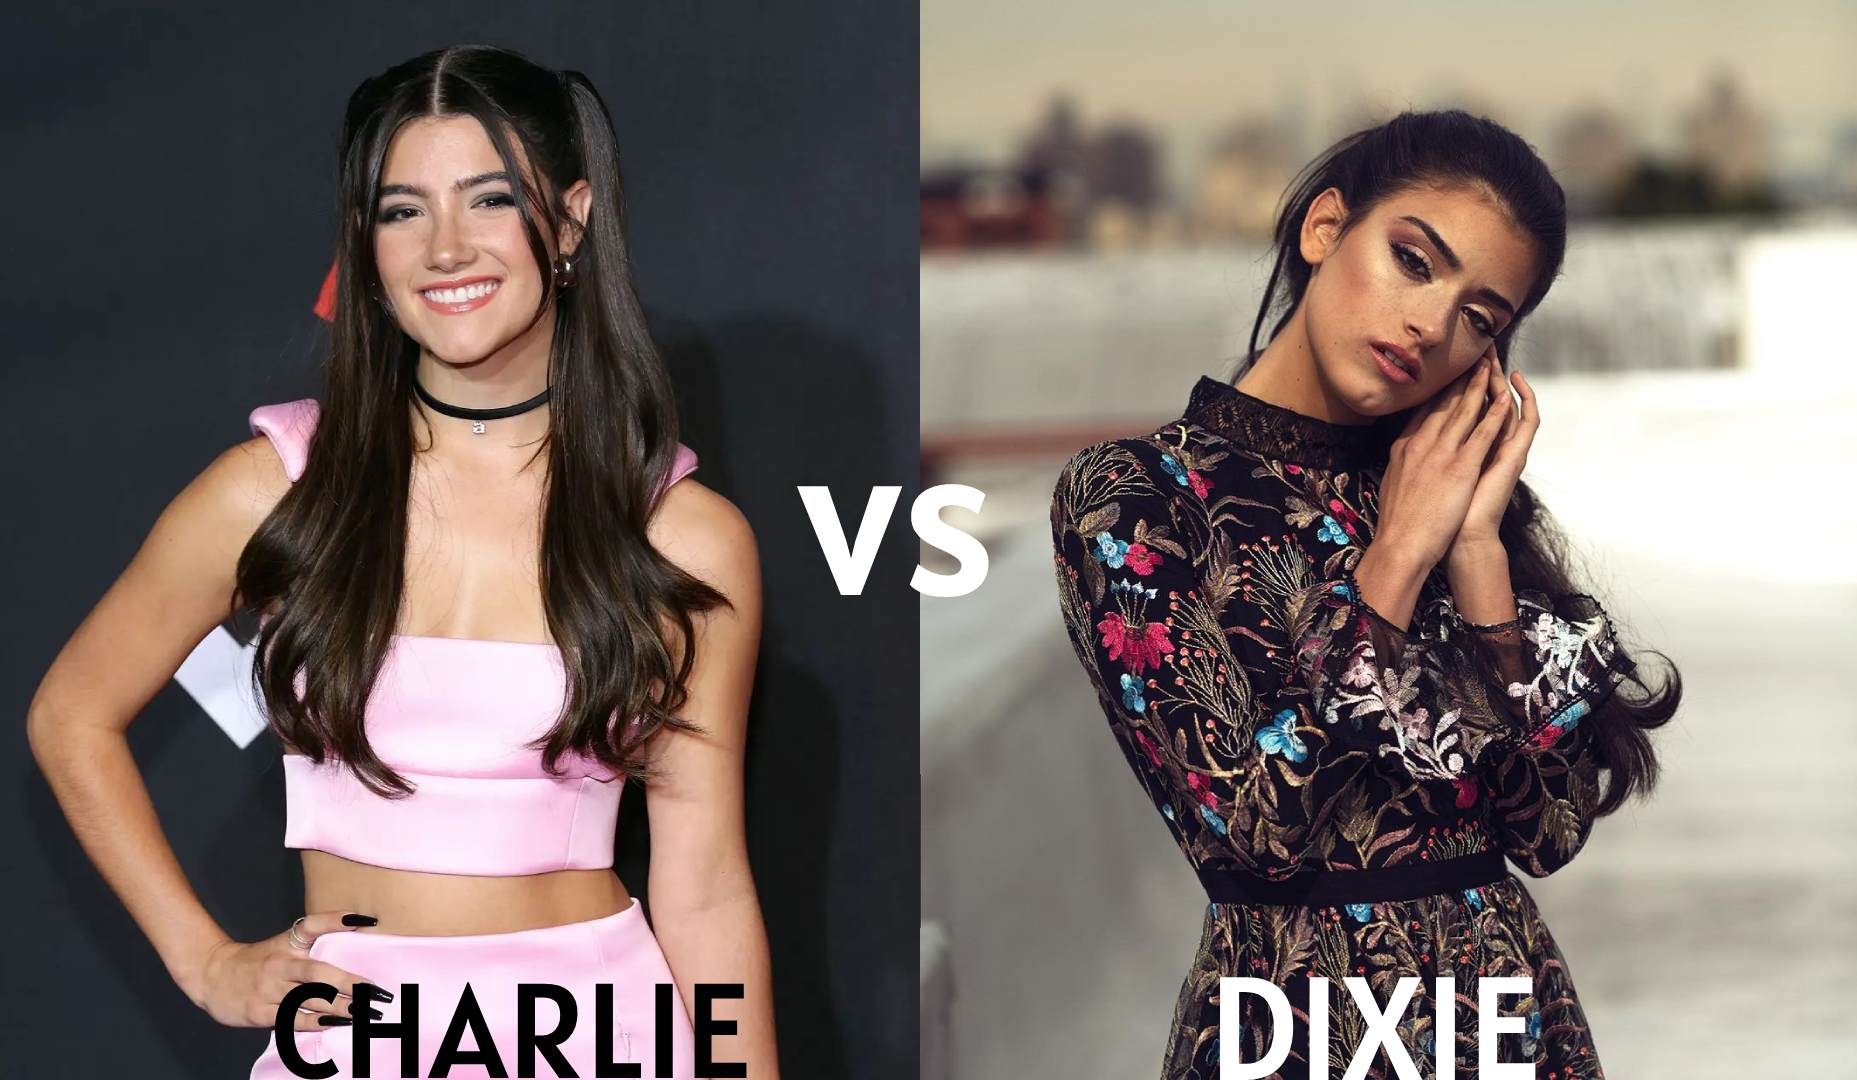 Charlie vs Dixie Who is more famous